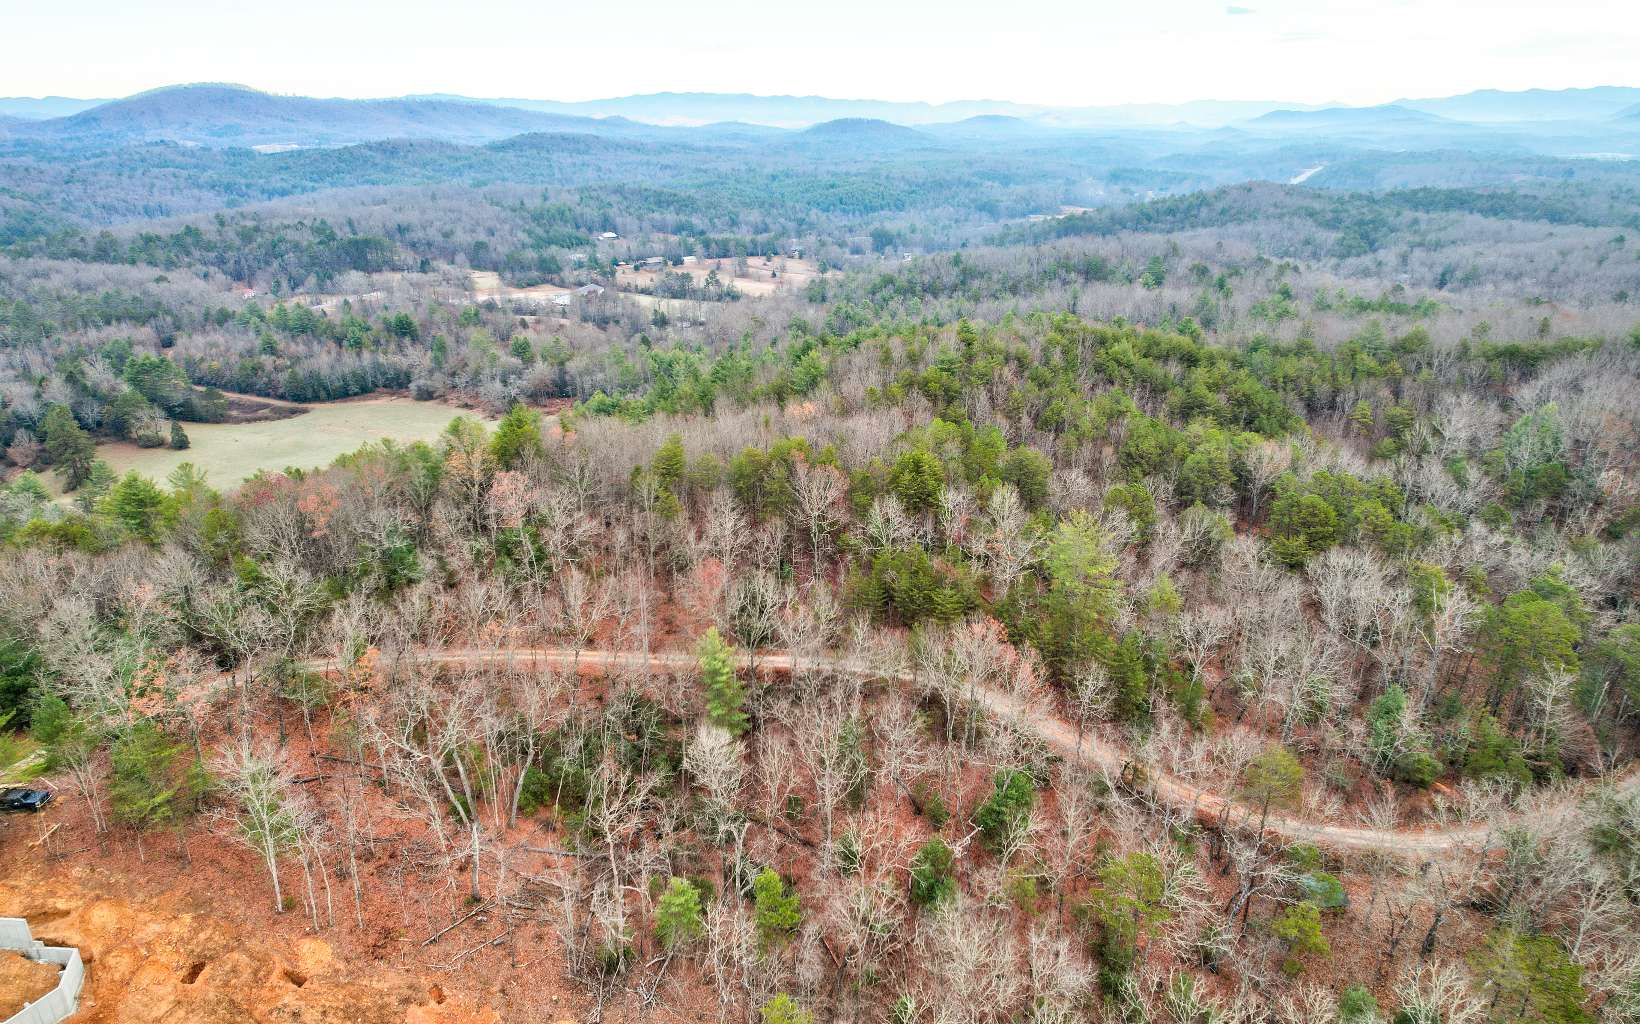 Come build your dream home on this amazing view lot. Just a few minutes from Blue Ridge, Murphy , and McCaysville. Multiple homes being built in this sought after area of the North Georgia Mountains. Lot is perked and ready for your builder to take a look !